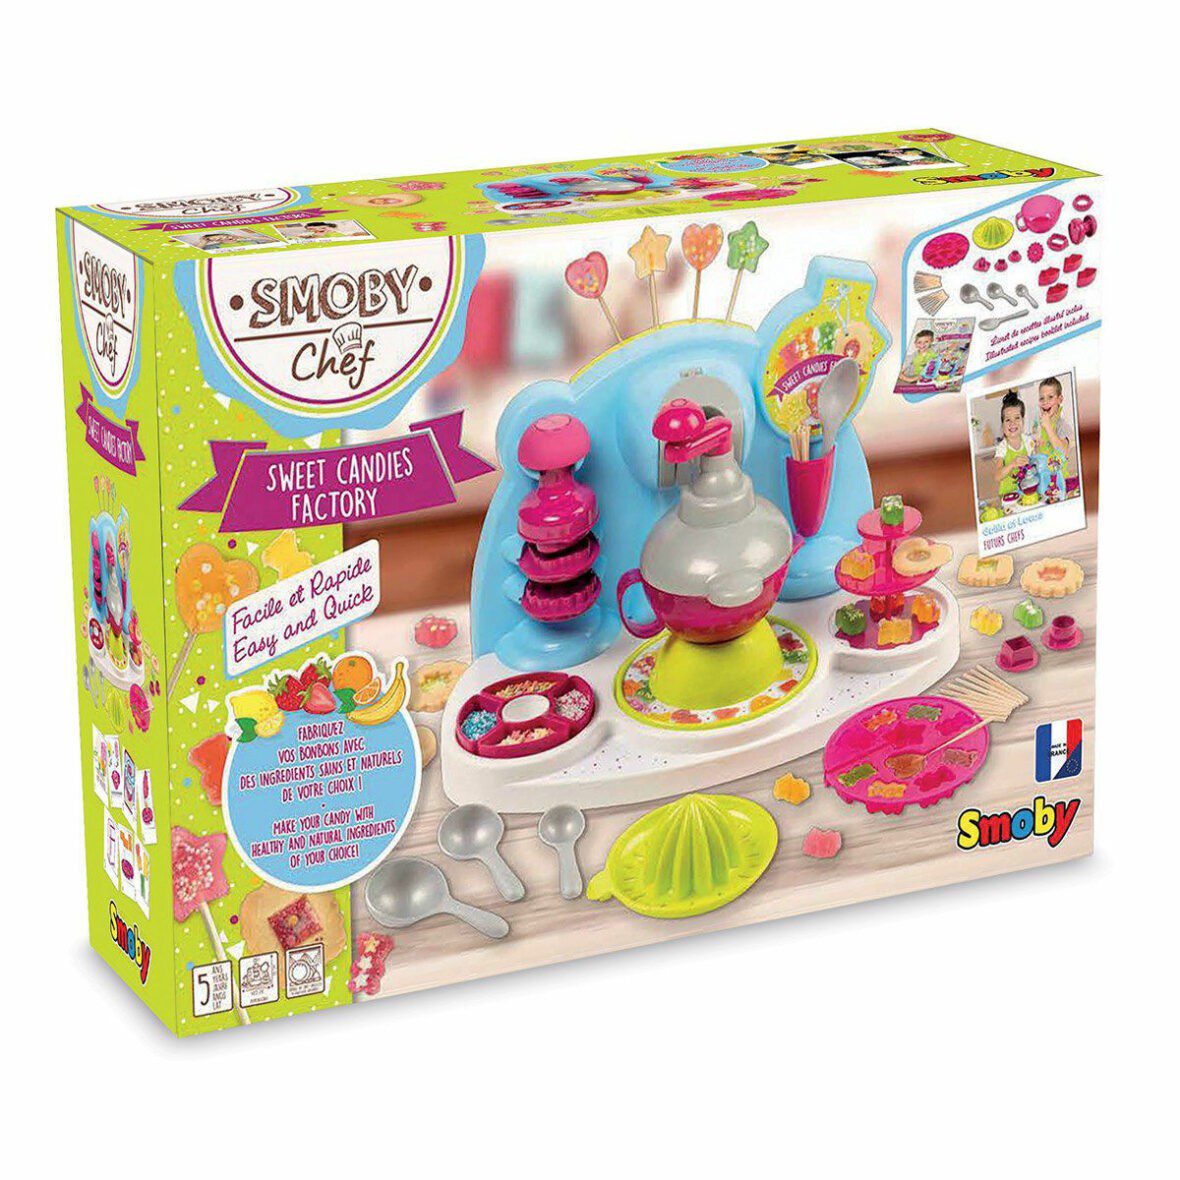 Chef Sweet Candies Factory – Smoby